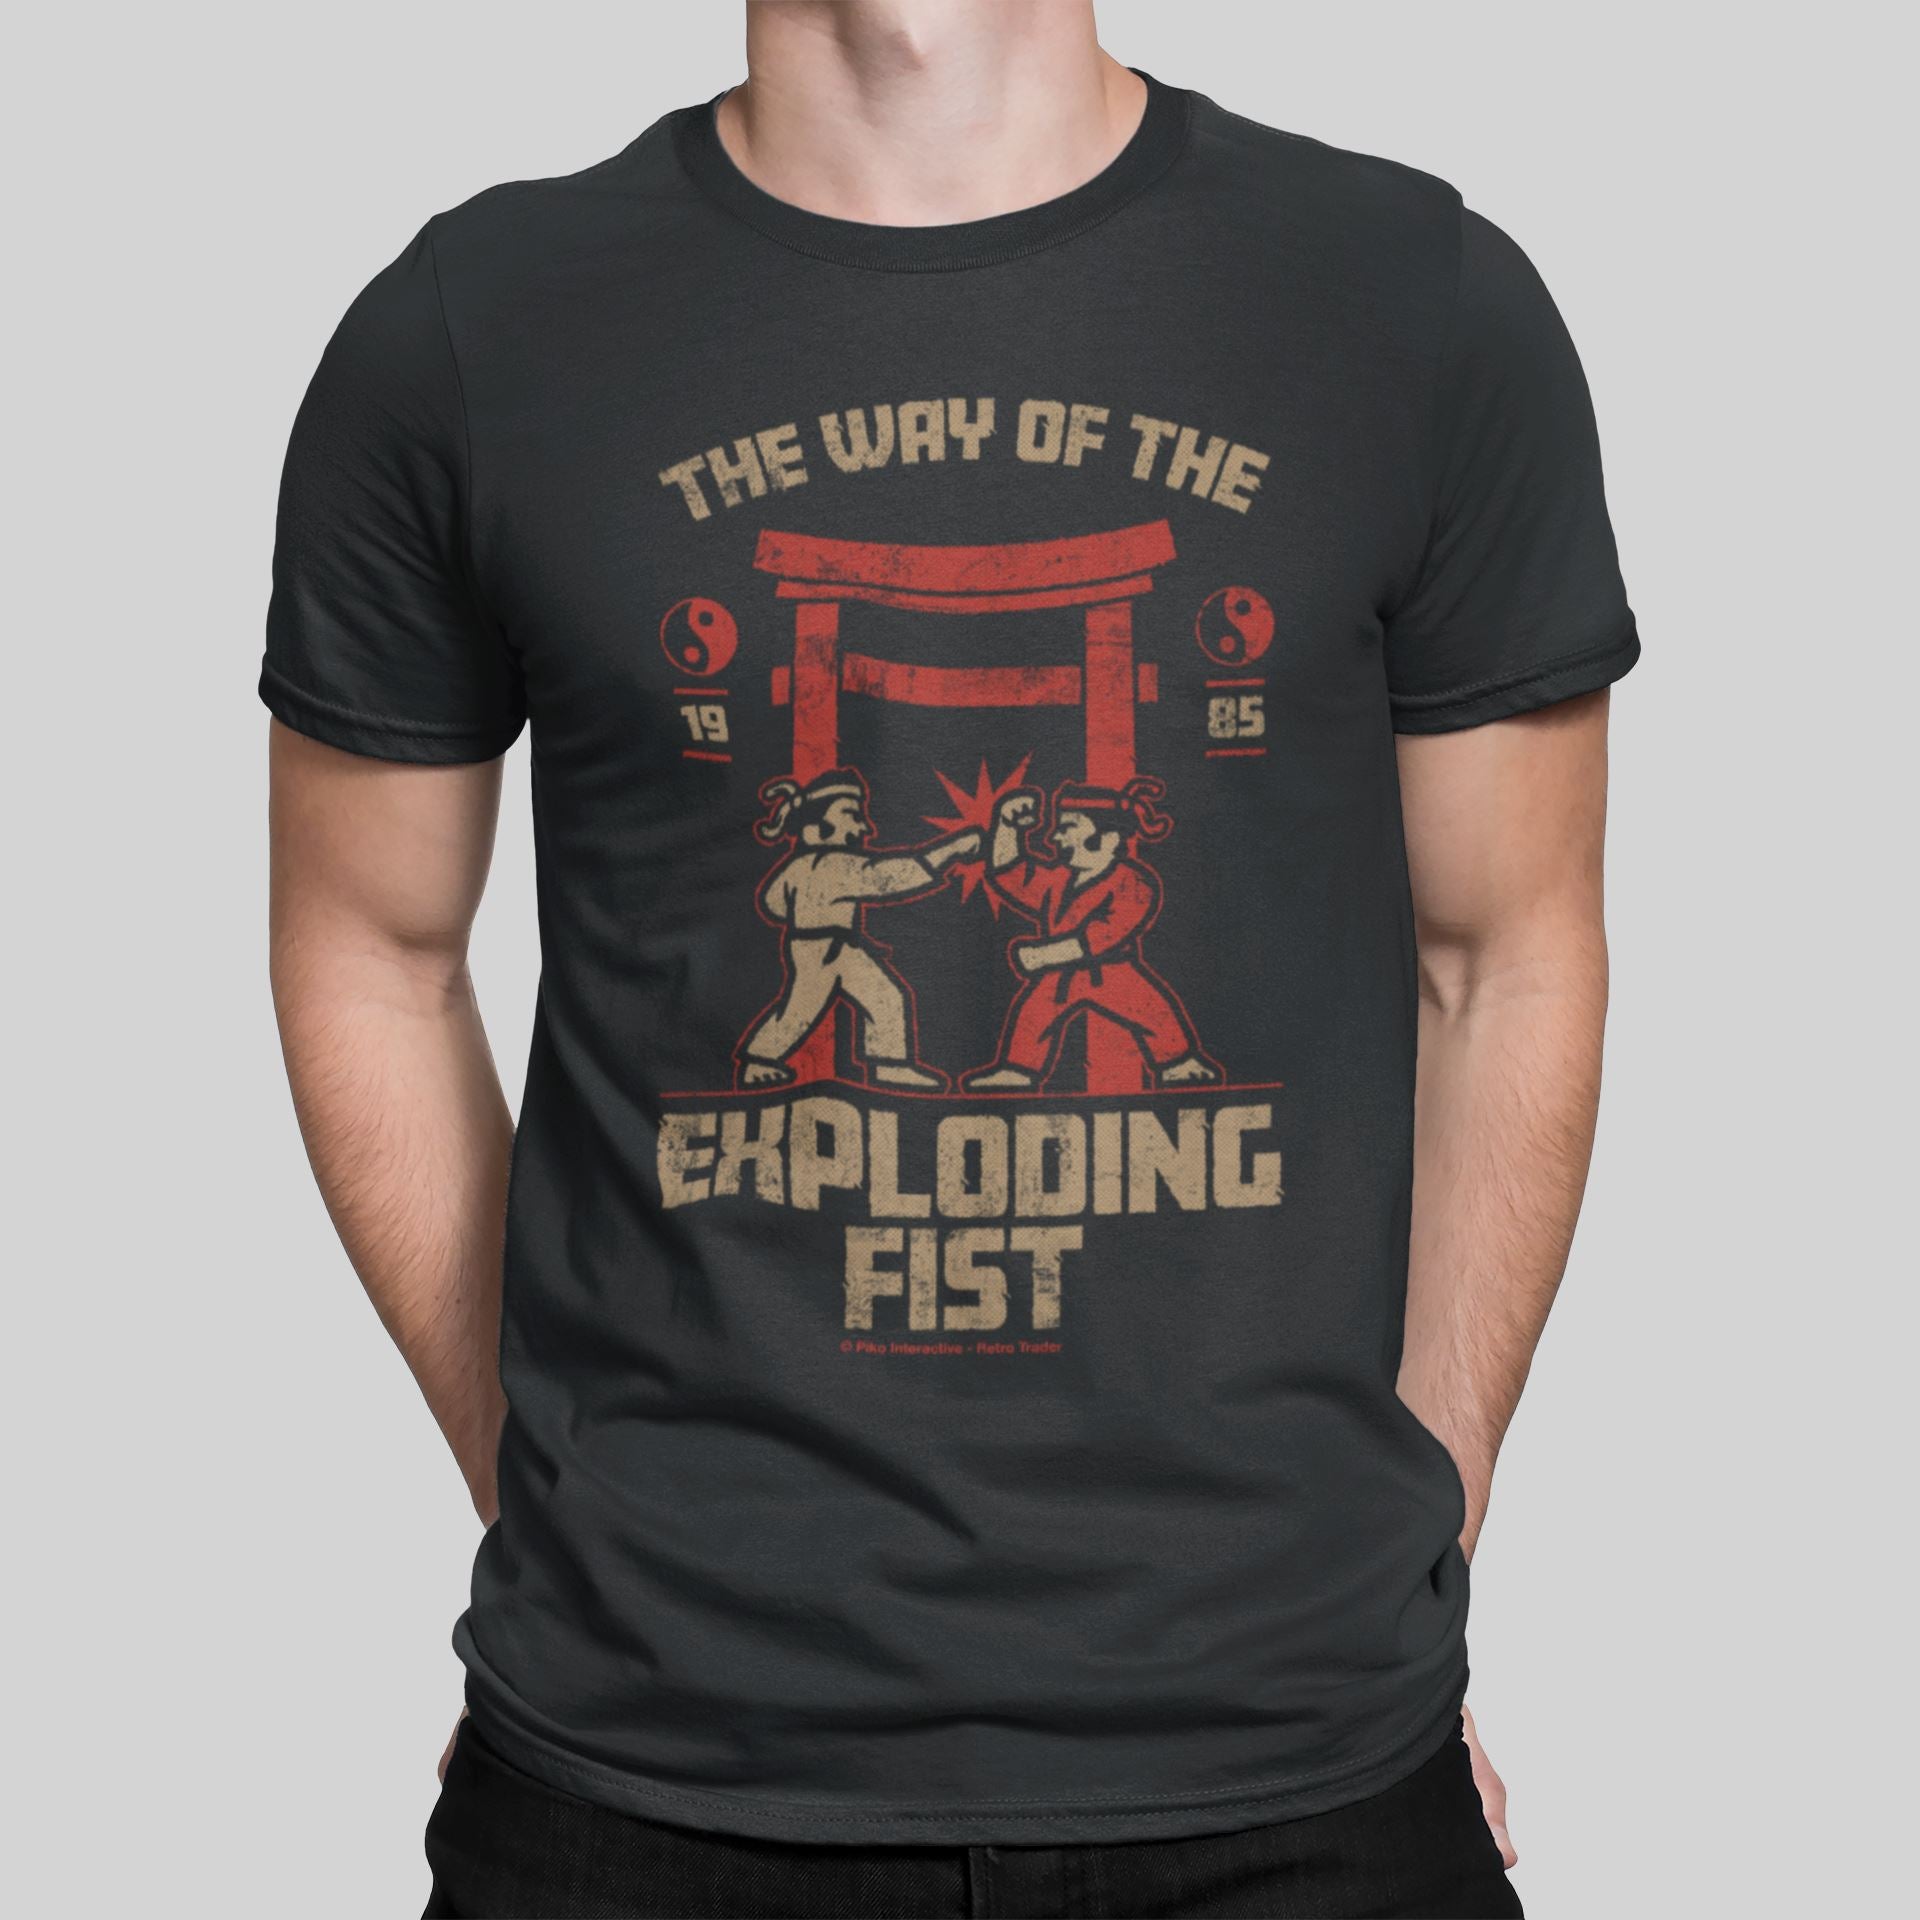 Way Of The Exploding Fist Retro Gaming T-Shirt T-Shirt Seven Squared Small 34-36" Black 